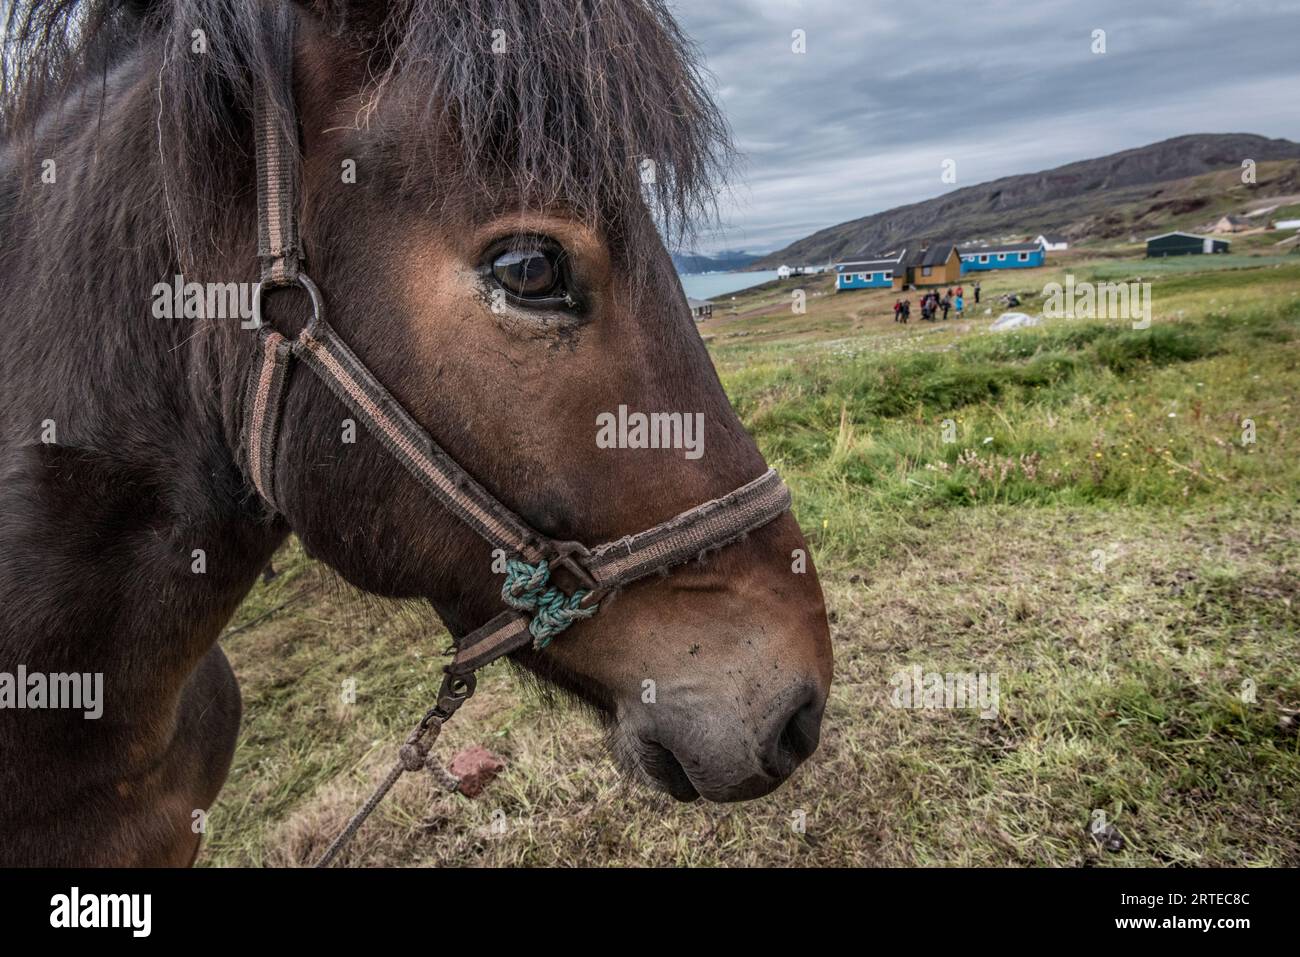 Close-up of a Greenland horse (or Icelandic horse, Equus ferus caballus) with a group of people on the hillside in the background at the Brattahlid... Stock Photo